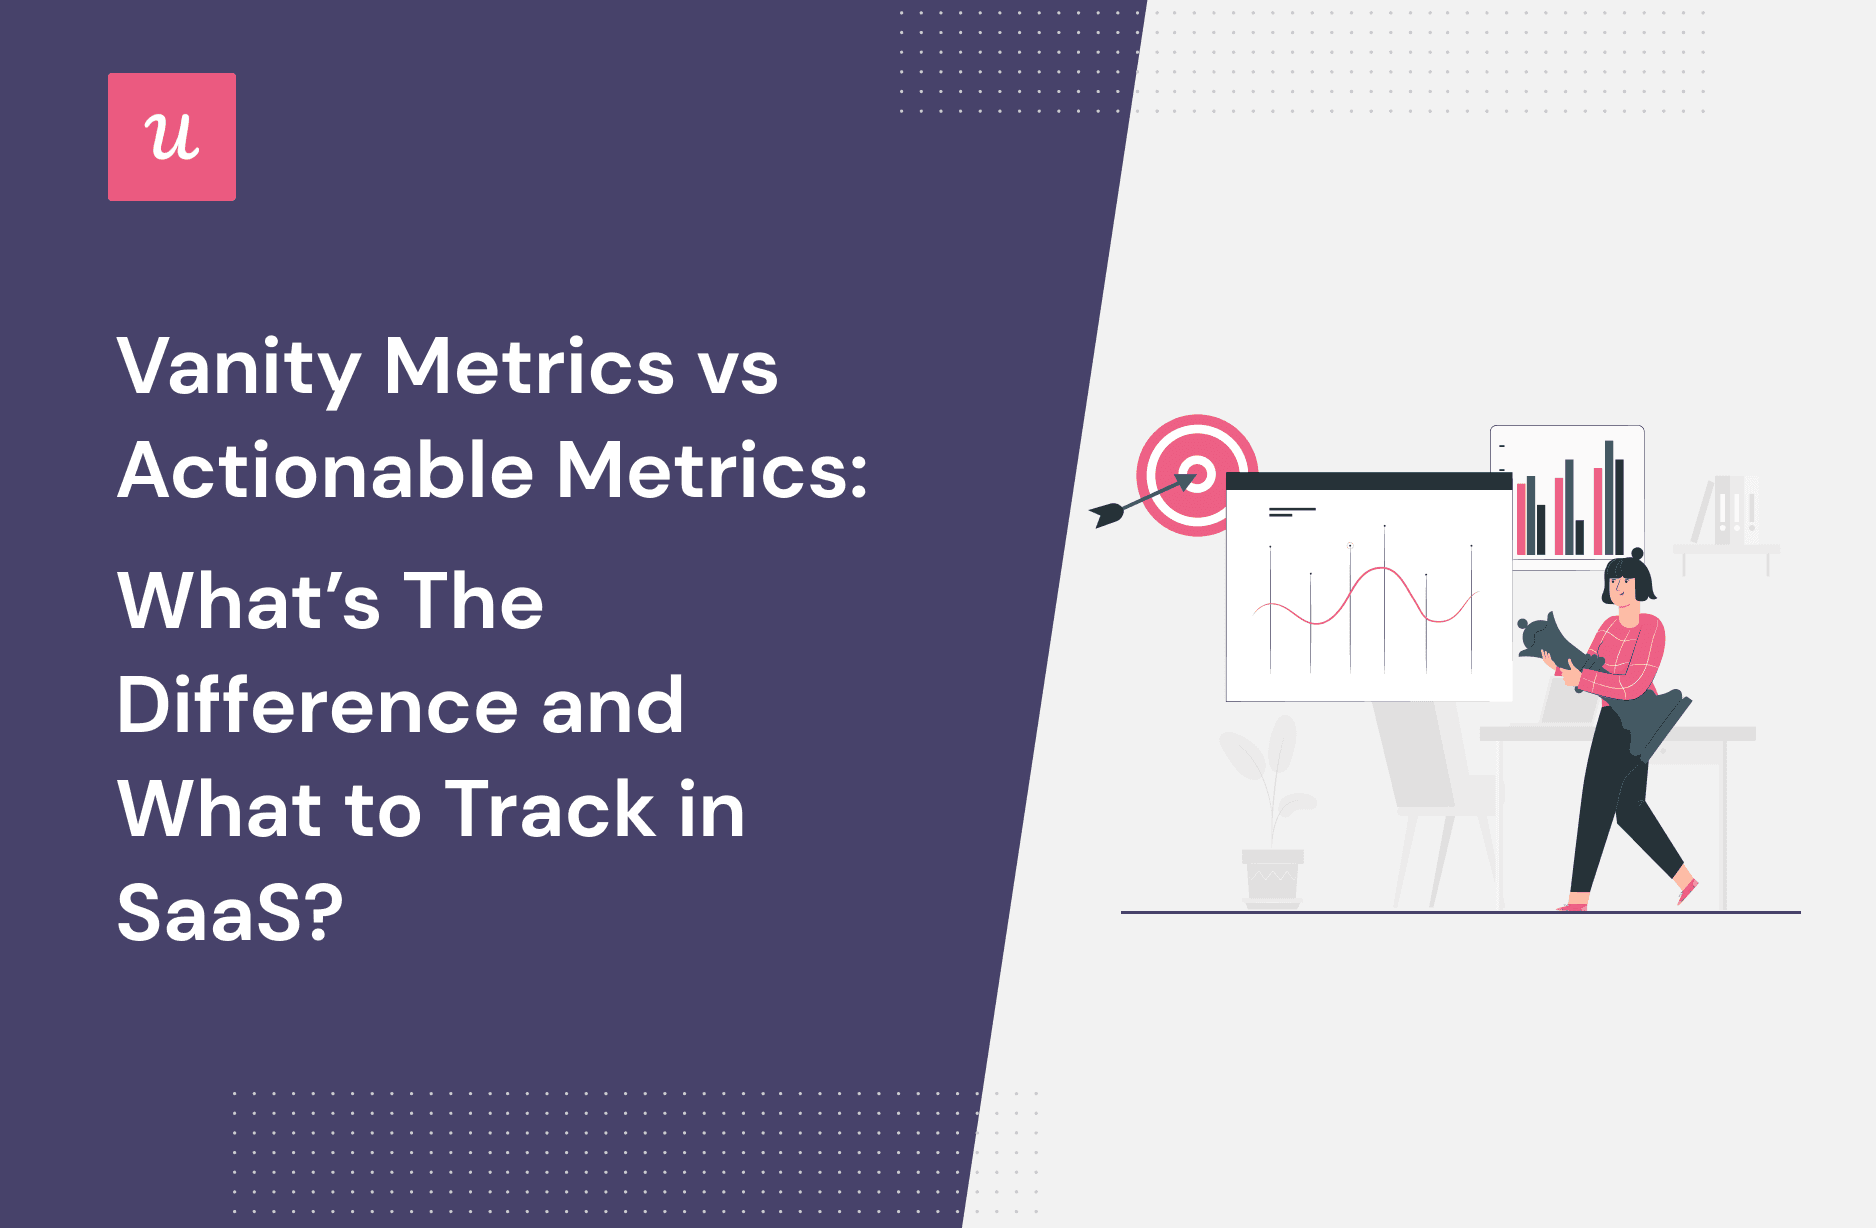 Vanity Metrics vs Actionable Metrics: What’s the Difference and What To Track in SaaS?